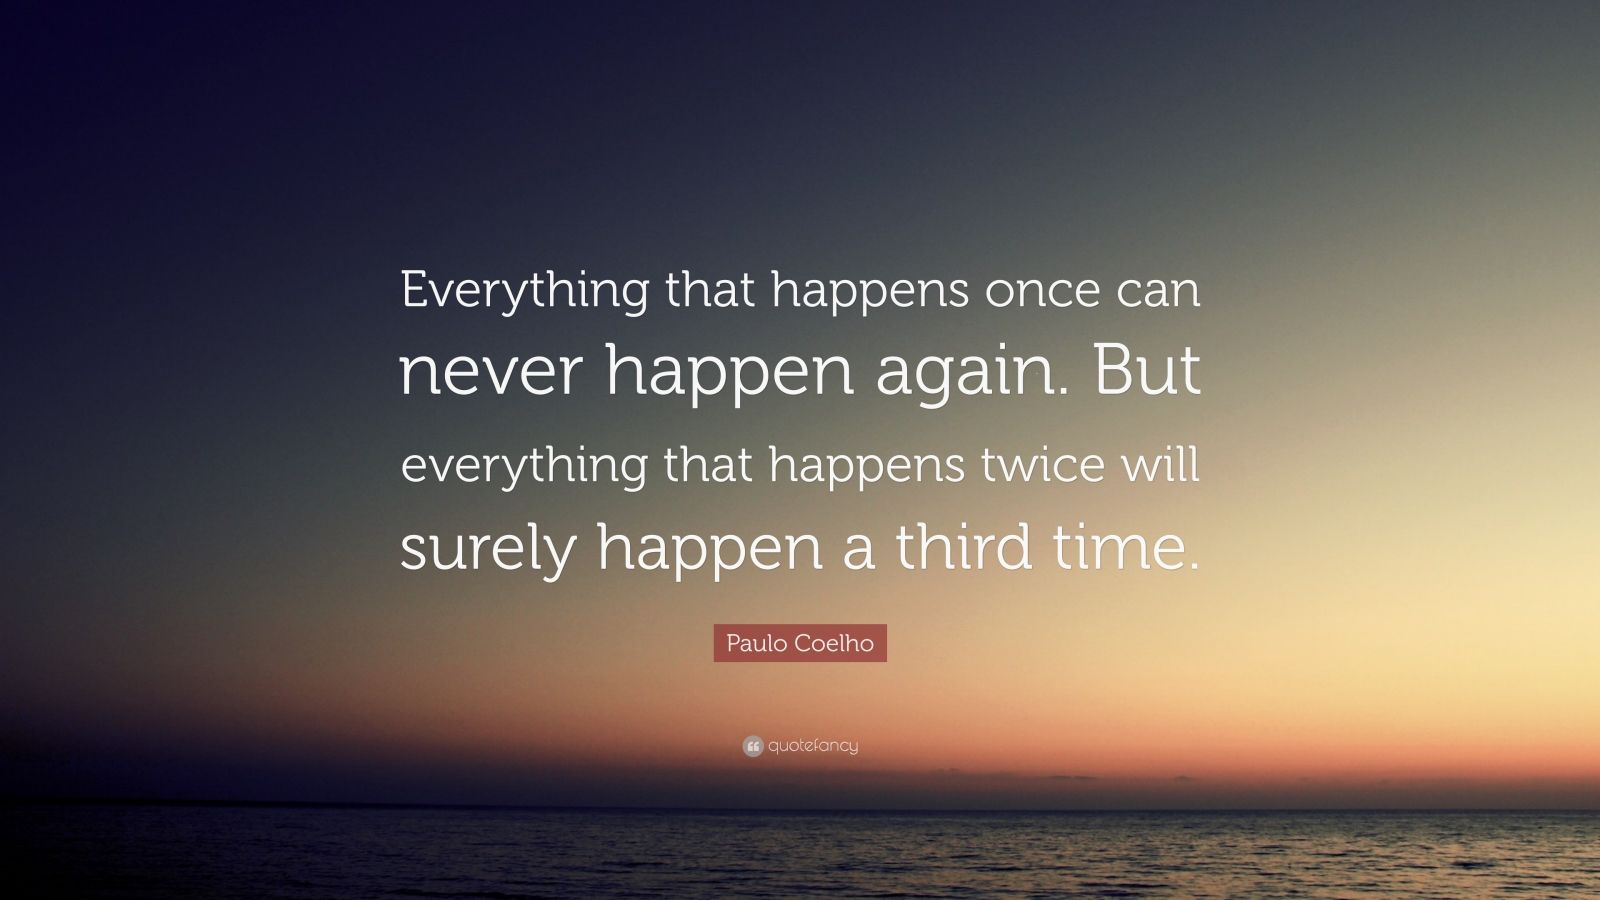 Paulo Coelho Quote “everything That Happens Once Can Never Happen